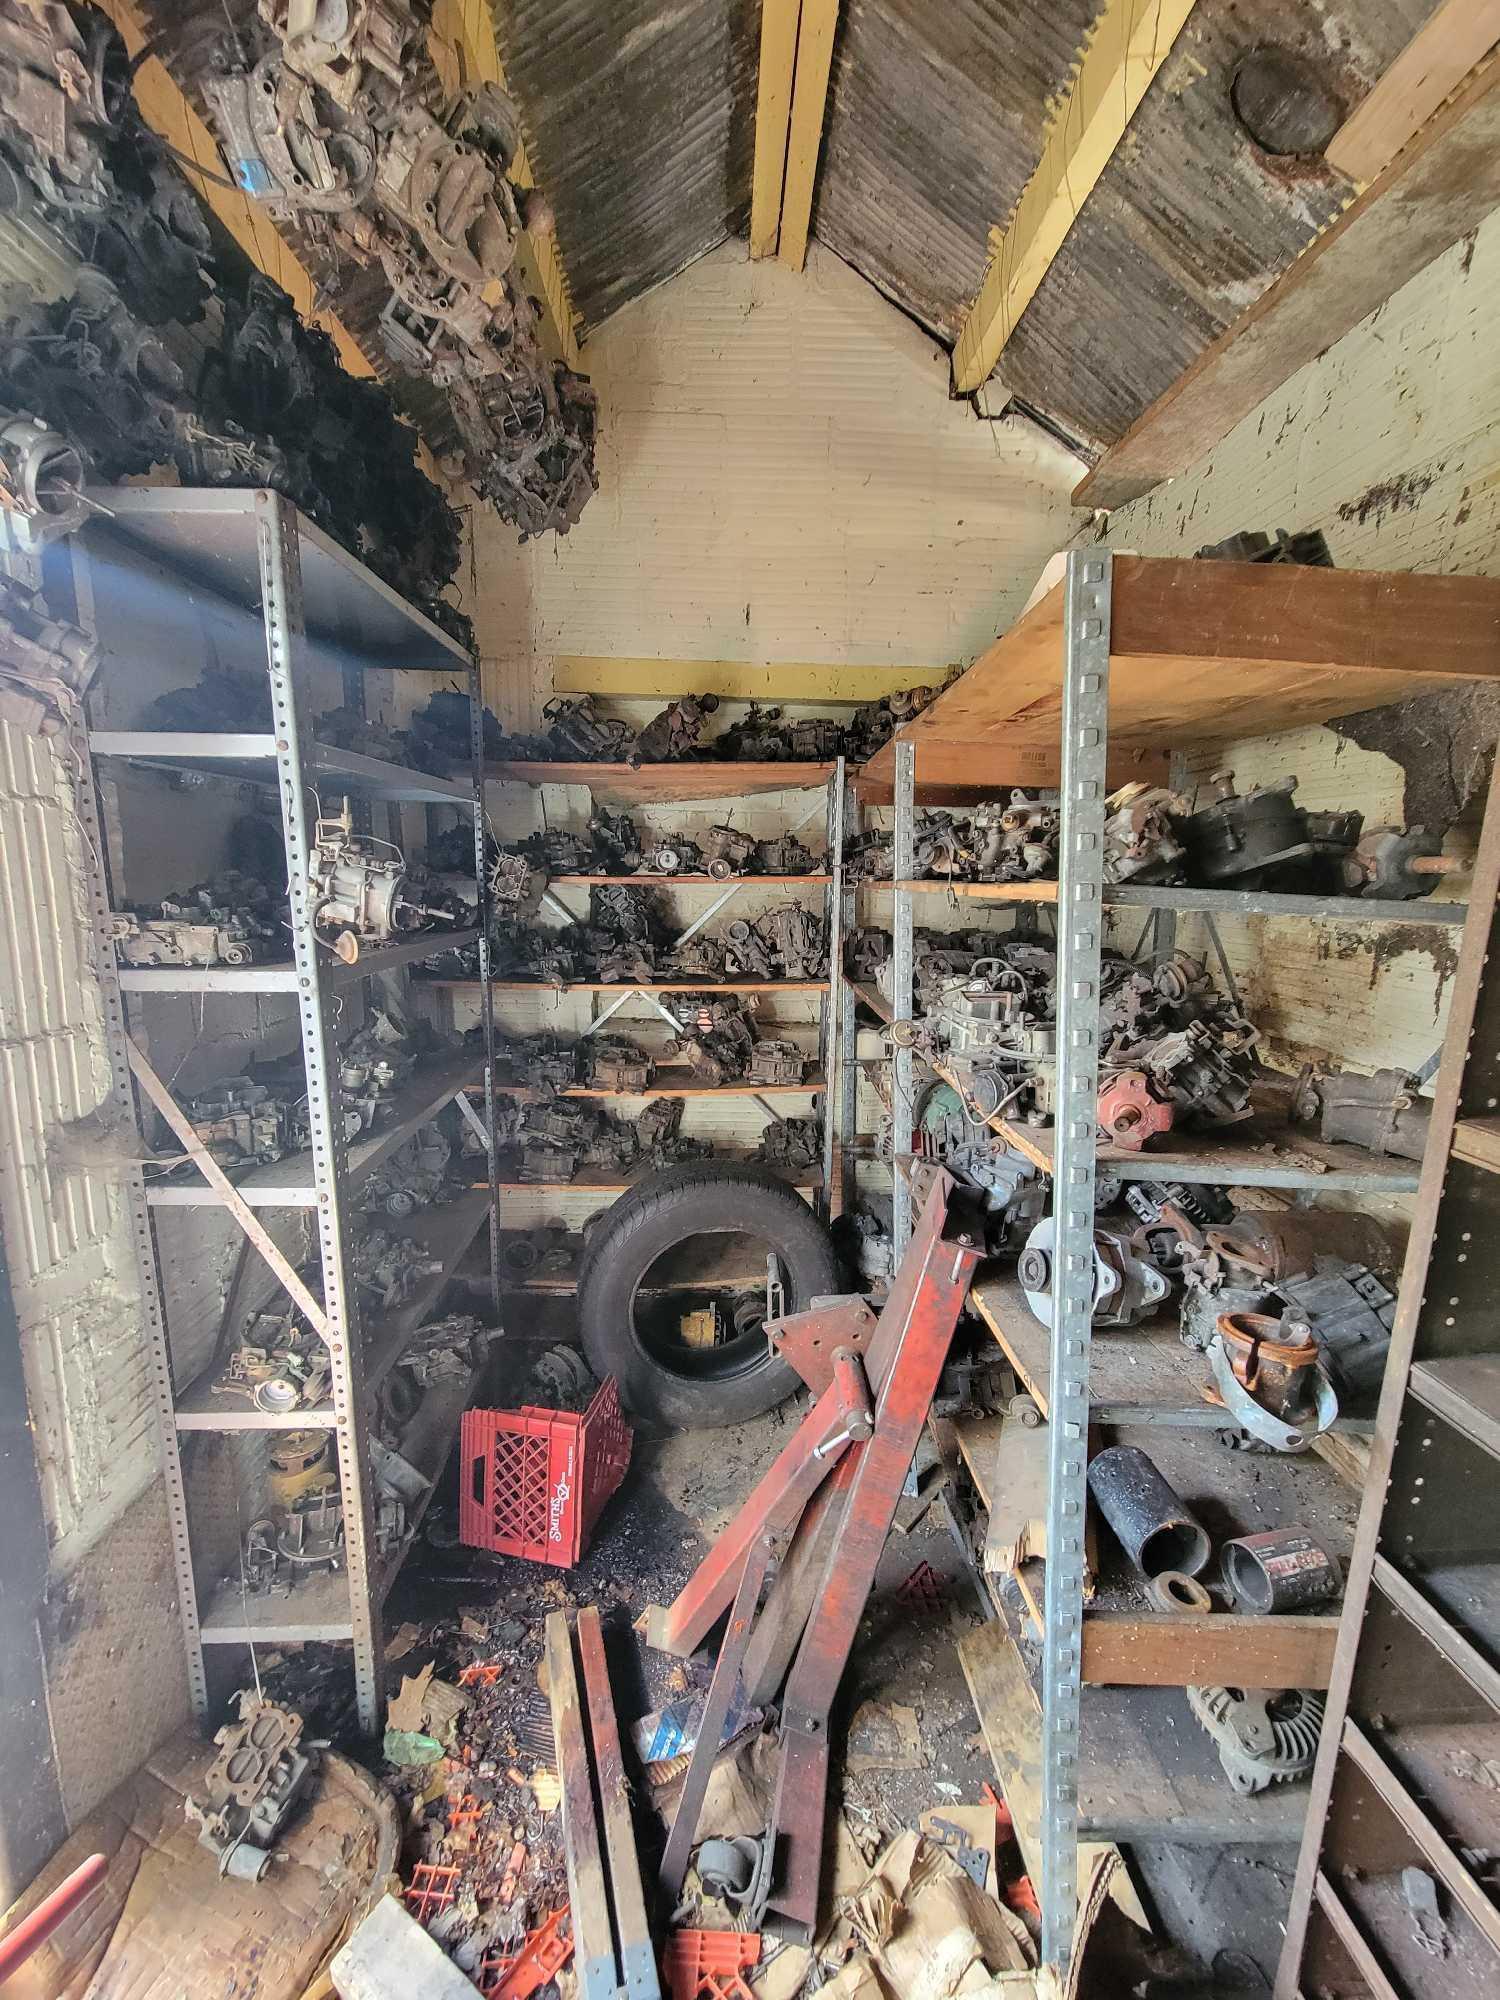 Contents of building, carburetors, engine stand, motor, scaffolding pieces, and more